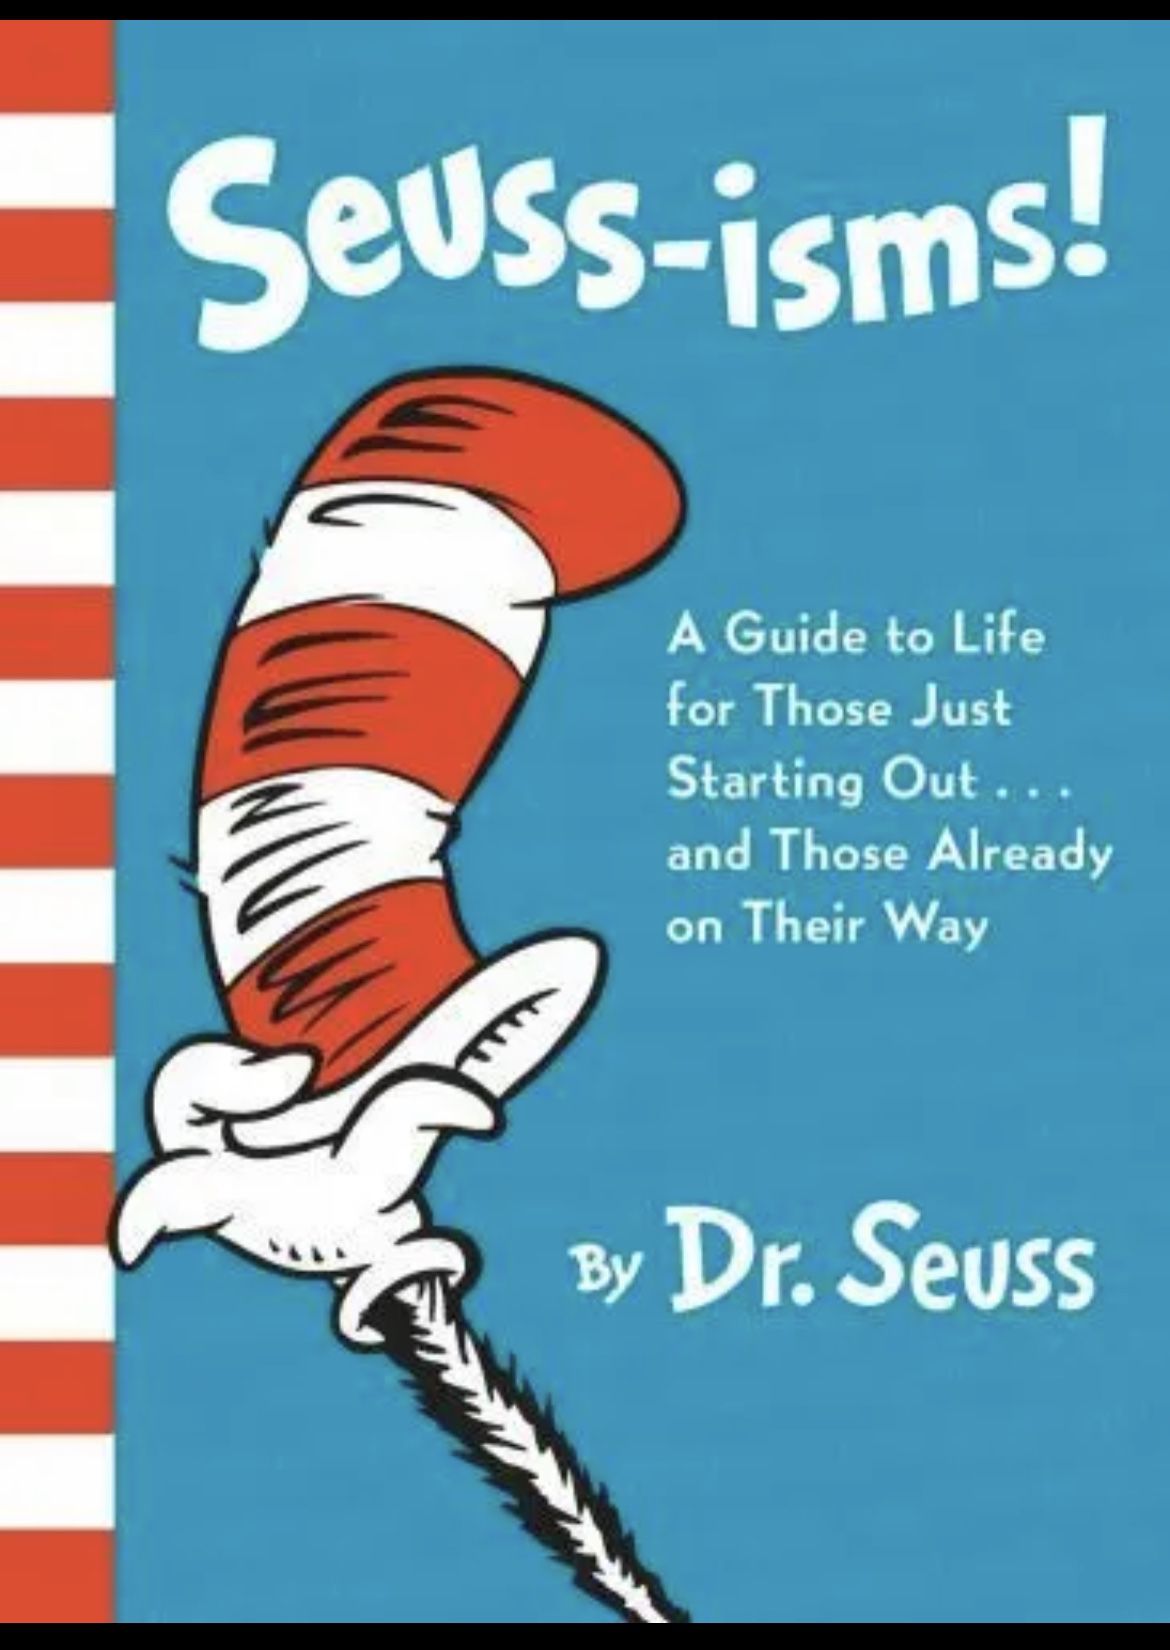 Seuss-Isms! A Guide to Life for Those Just Starting Out and Those on Their Way (Hardcover)